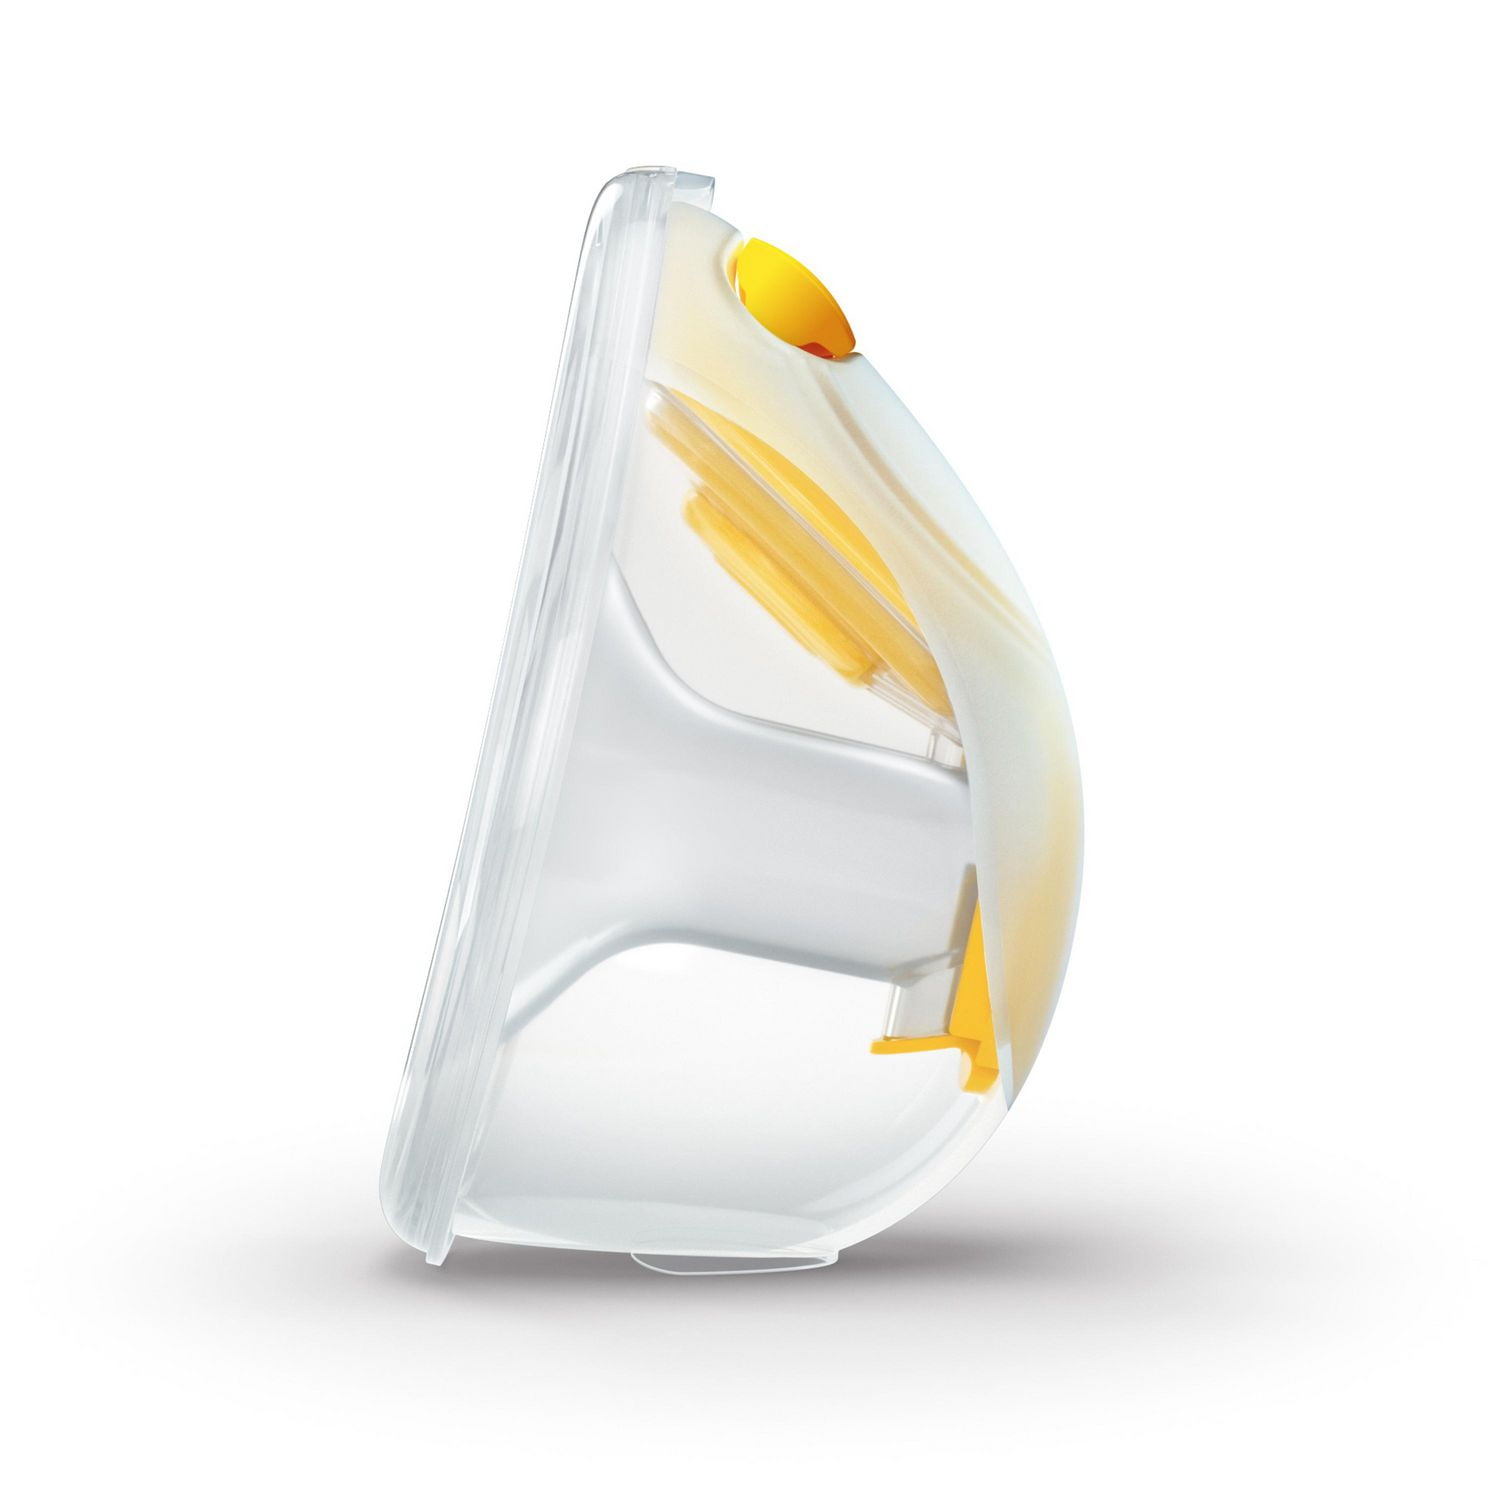 Medela Freestyle Hands-Free Breast Pump - Wearable, Portable and Discreet  Double Electric Breast Pump with App Connectivity